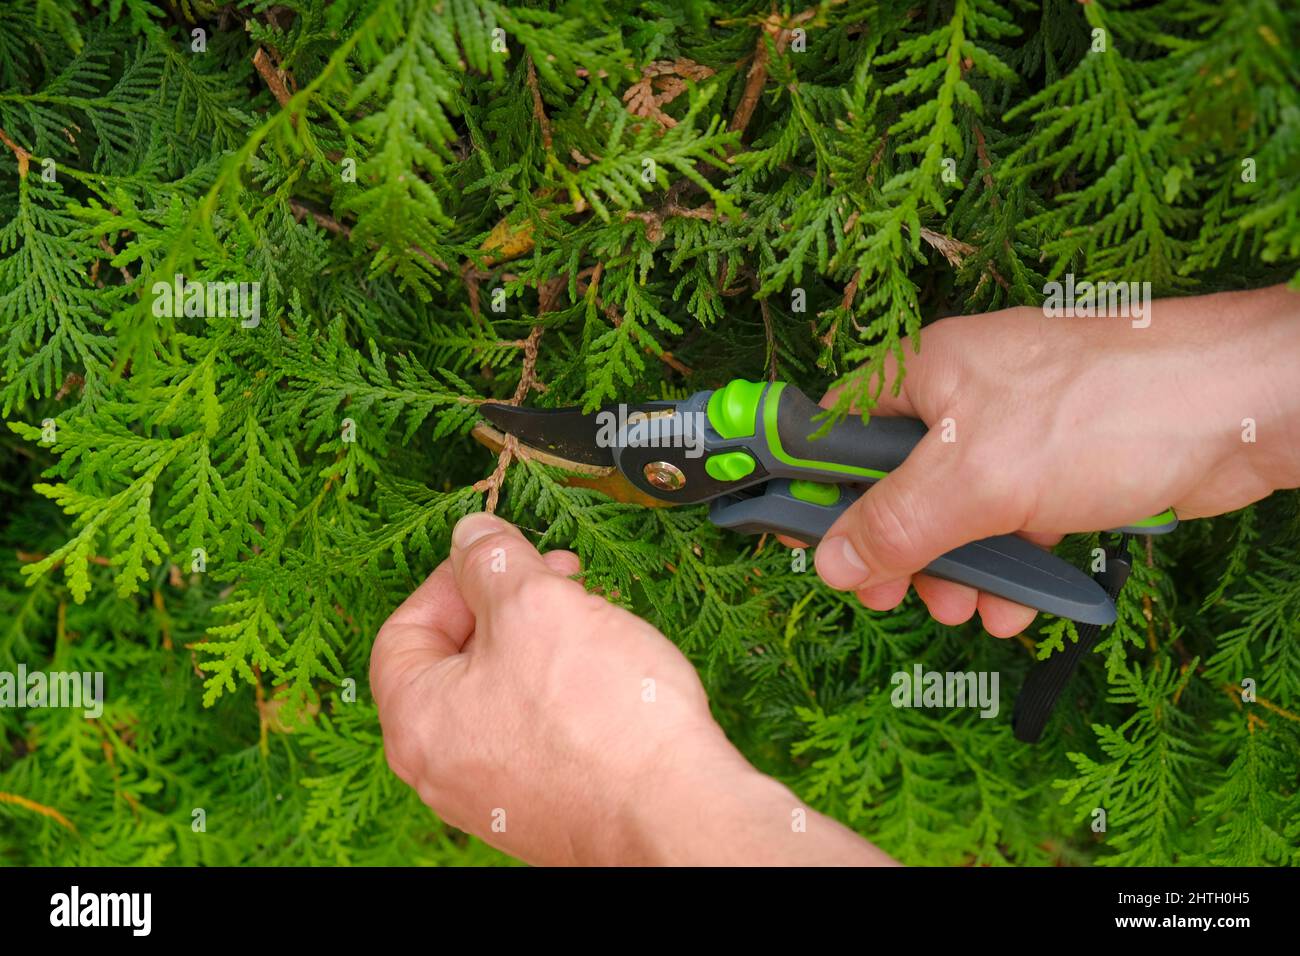 Garden shears in hands cutting a hedge.Plant pruning.Gardening and plant formation.Pruning thuja.Gardening Tools.Spring gardening.  Stock Photo